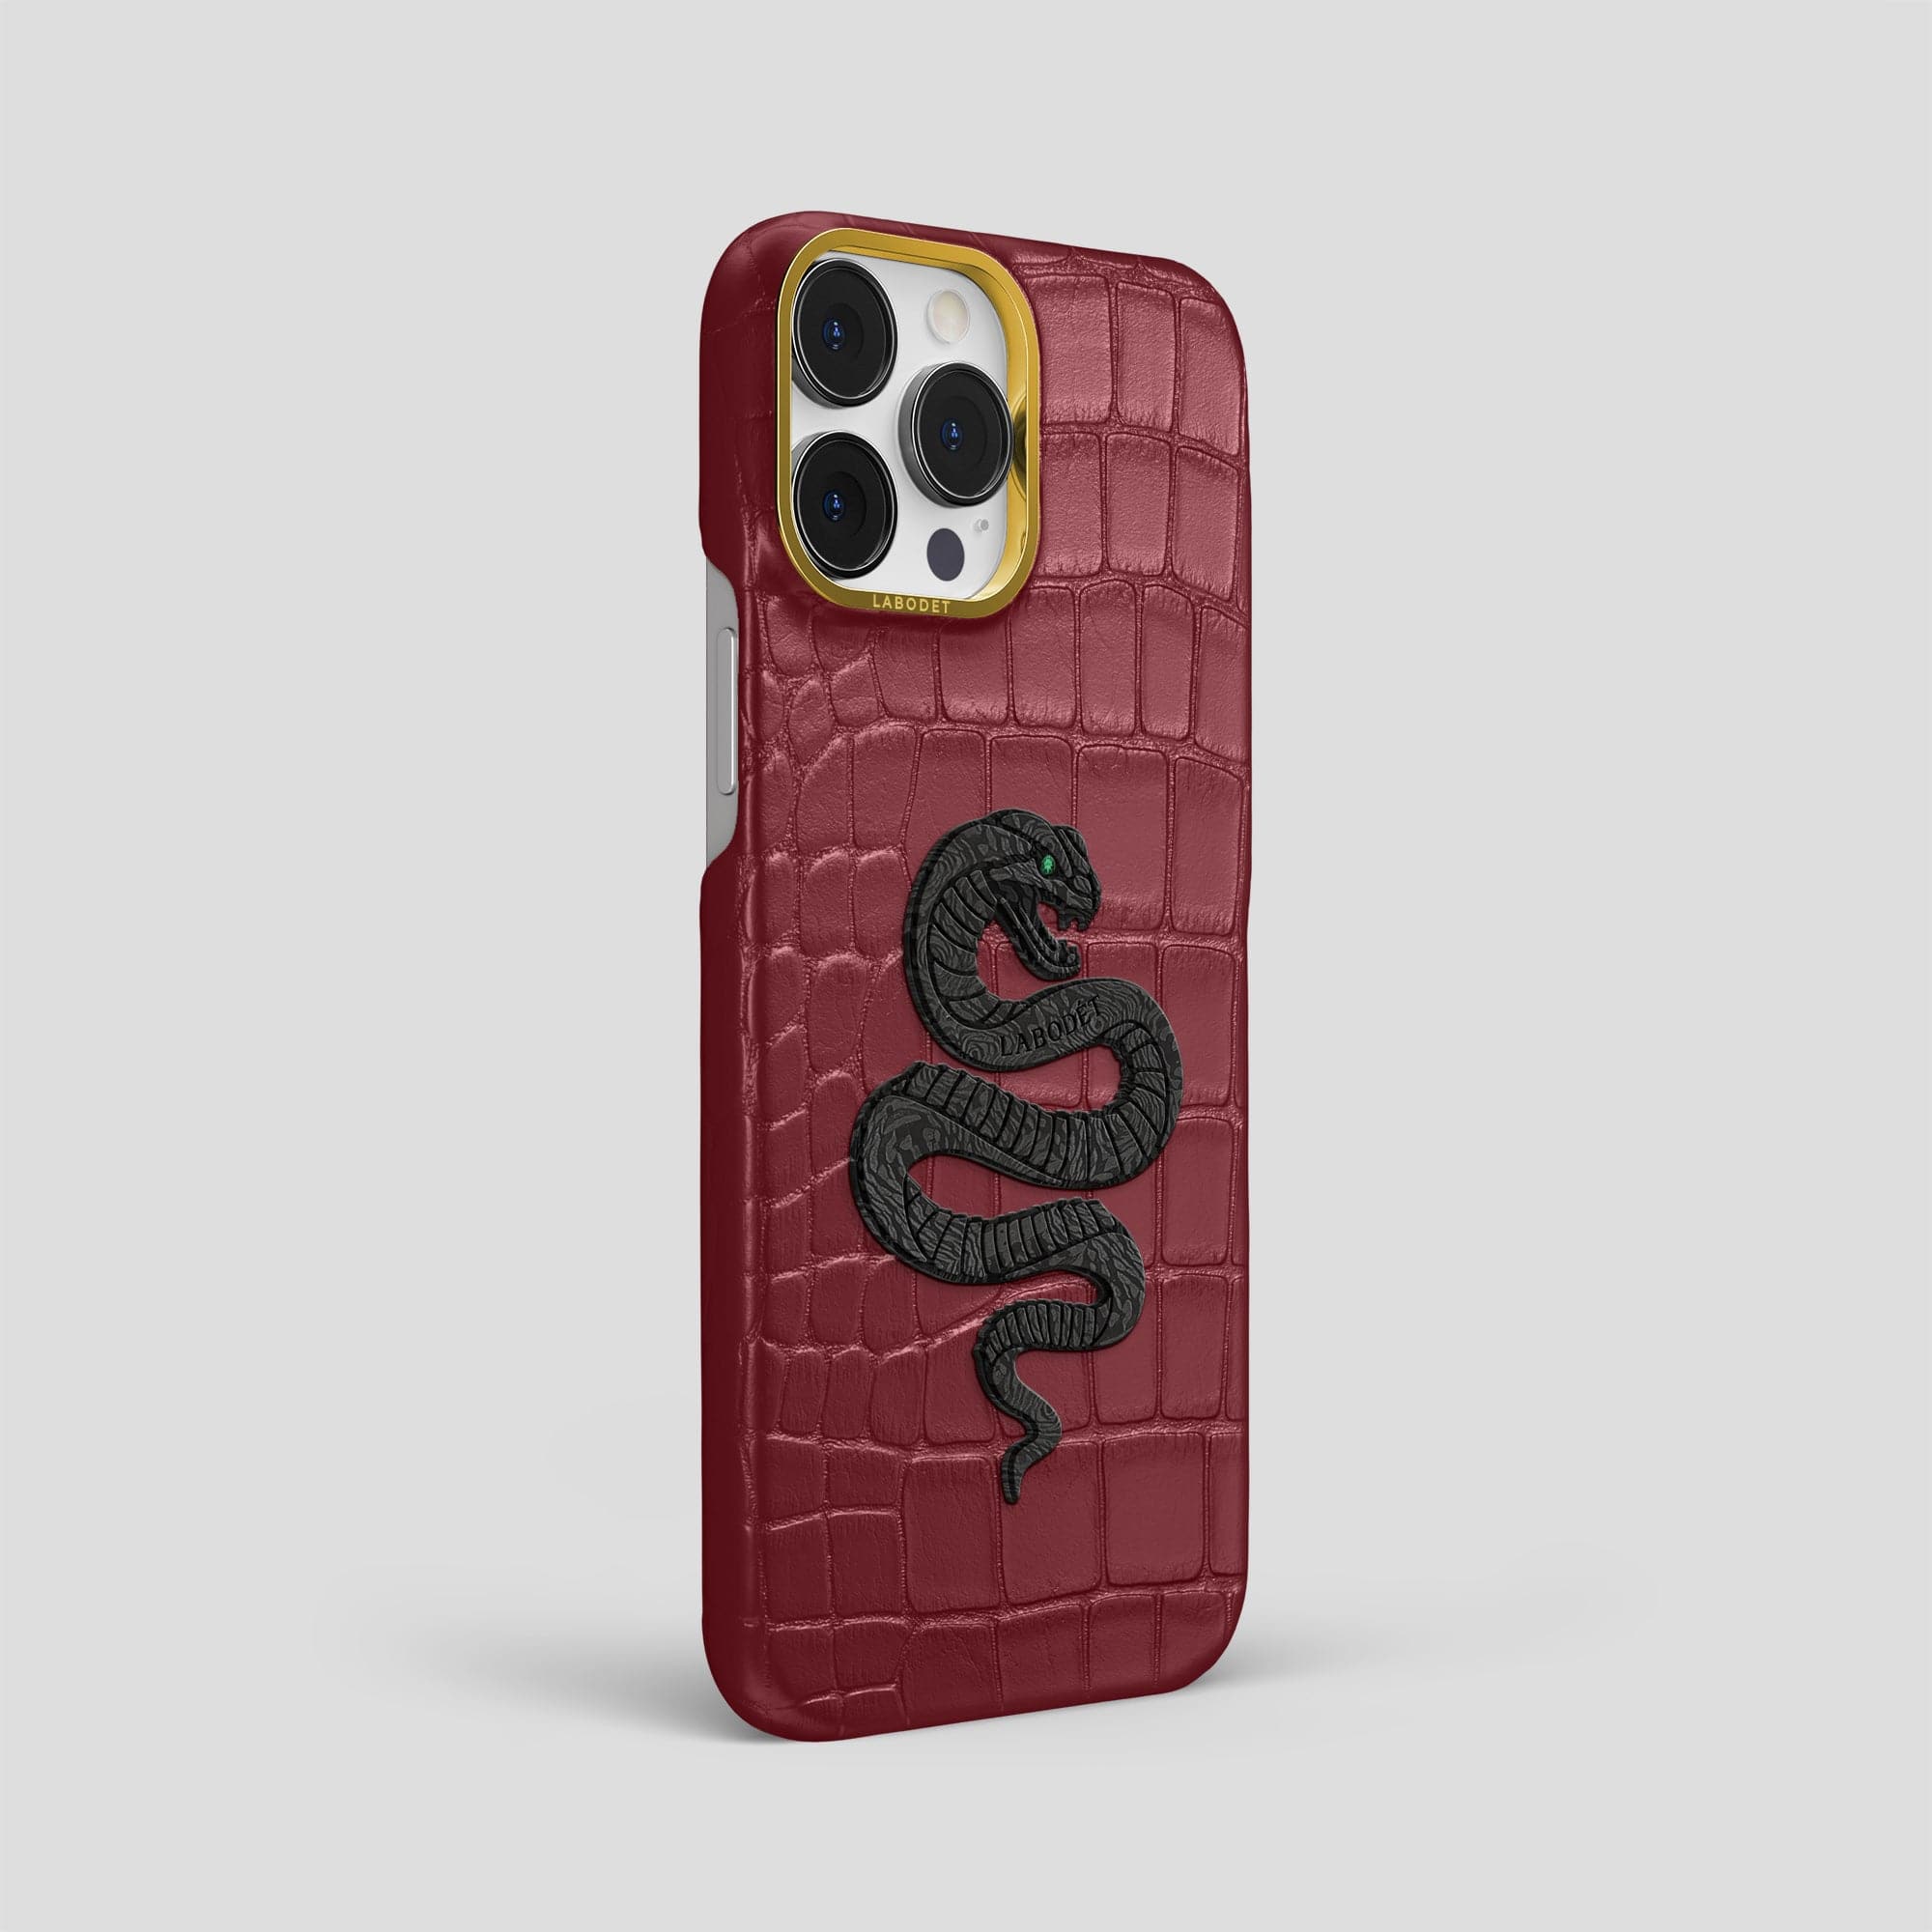 GUCCI SNAKE LOGO iPhone 13 Pro Case Cover